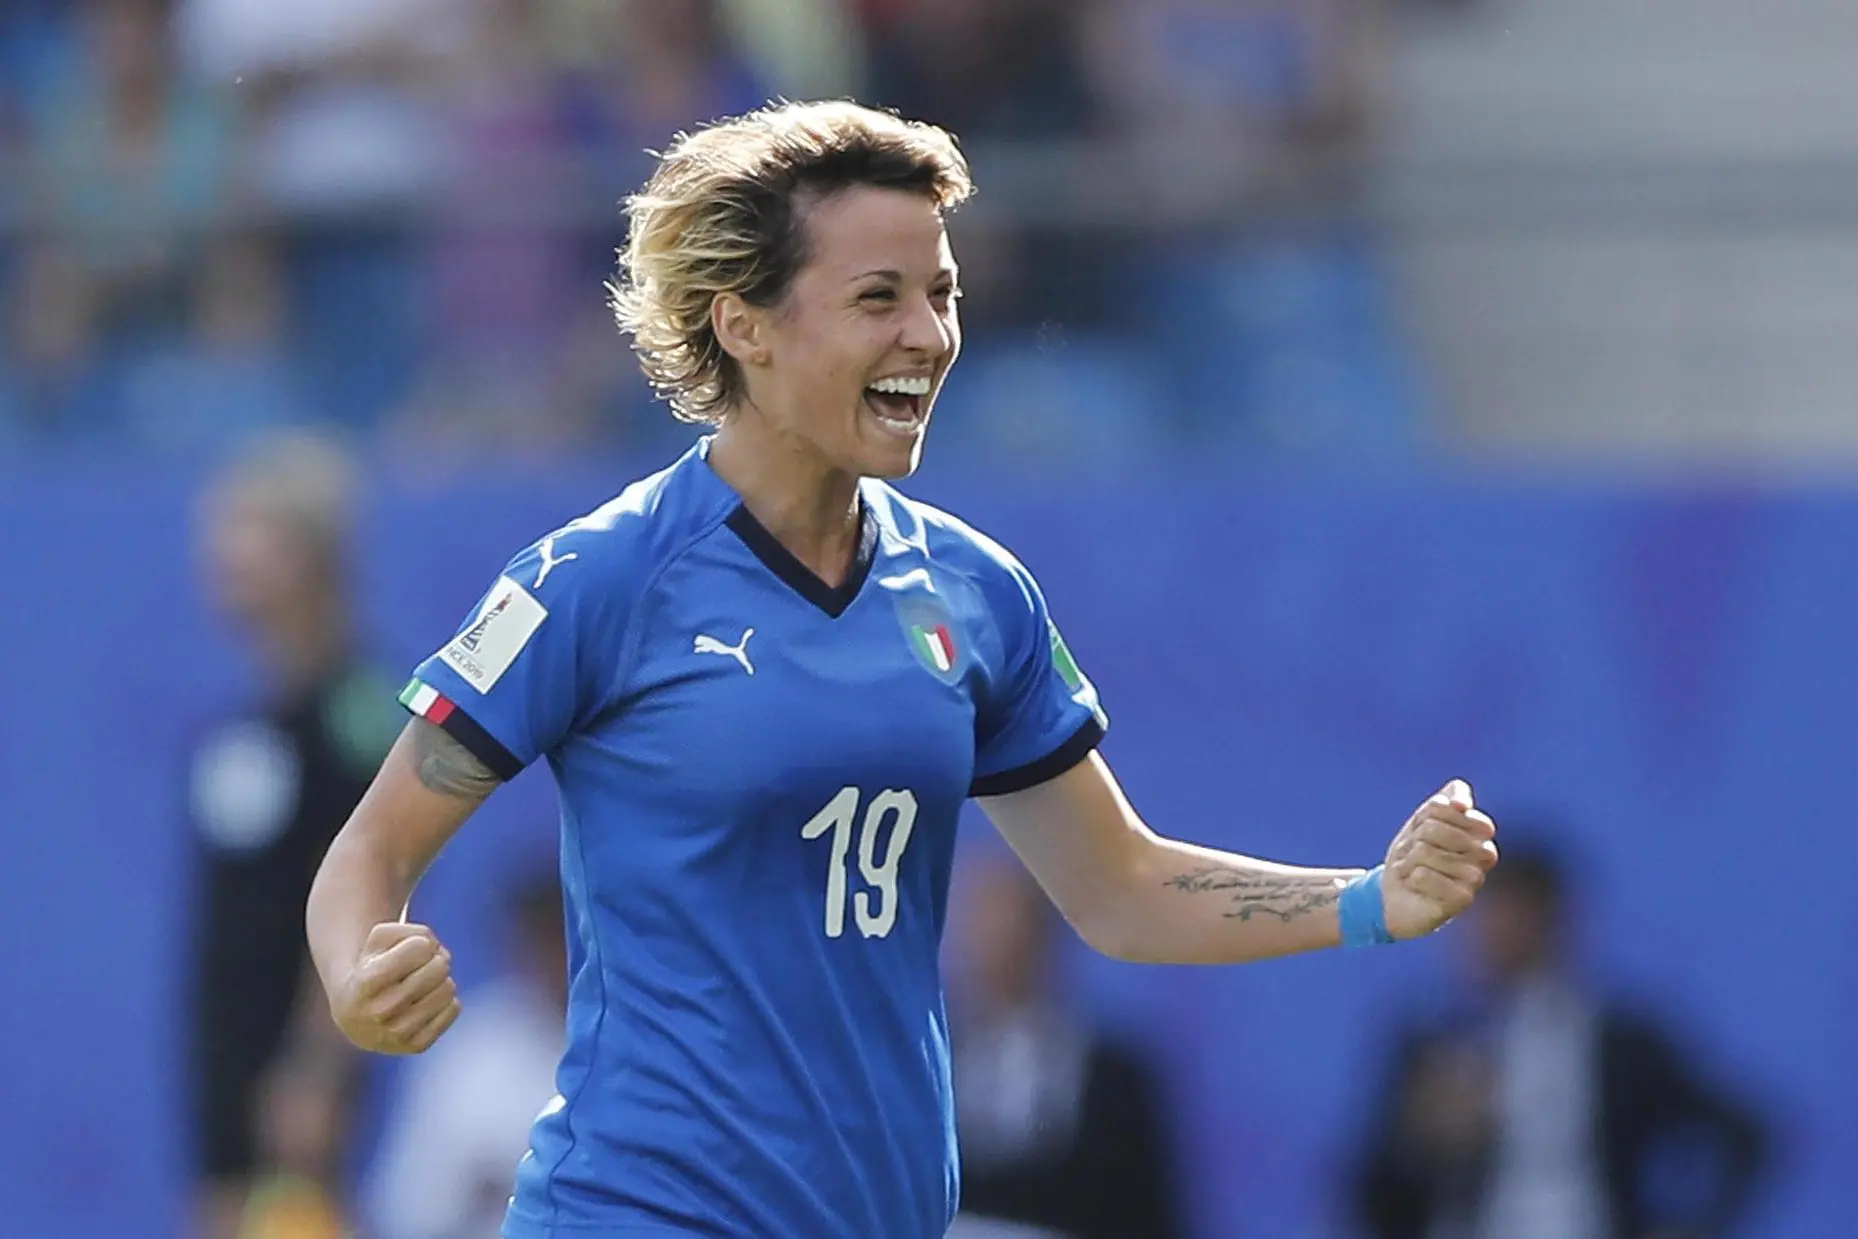 epa07673054 Valentina Giacinti of Italy celebrates a goal during the round of 16 match between Italy and China at the FIFA Women's World Cup 2019 in Montpellier, France, 25 June 2019. EPA/GUILLAUME HORCAJUELO